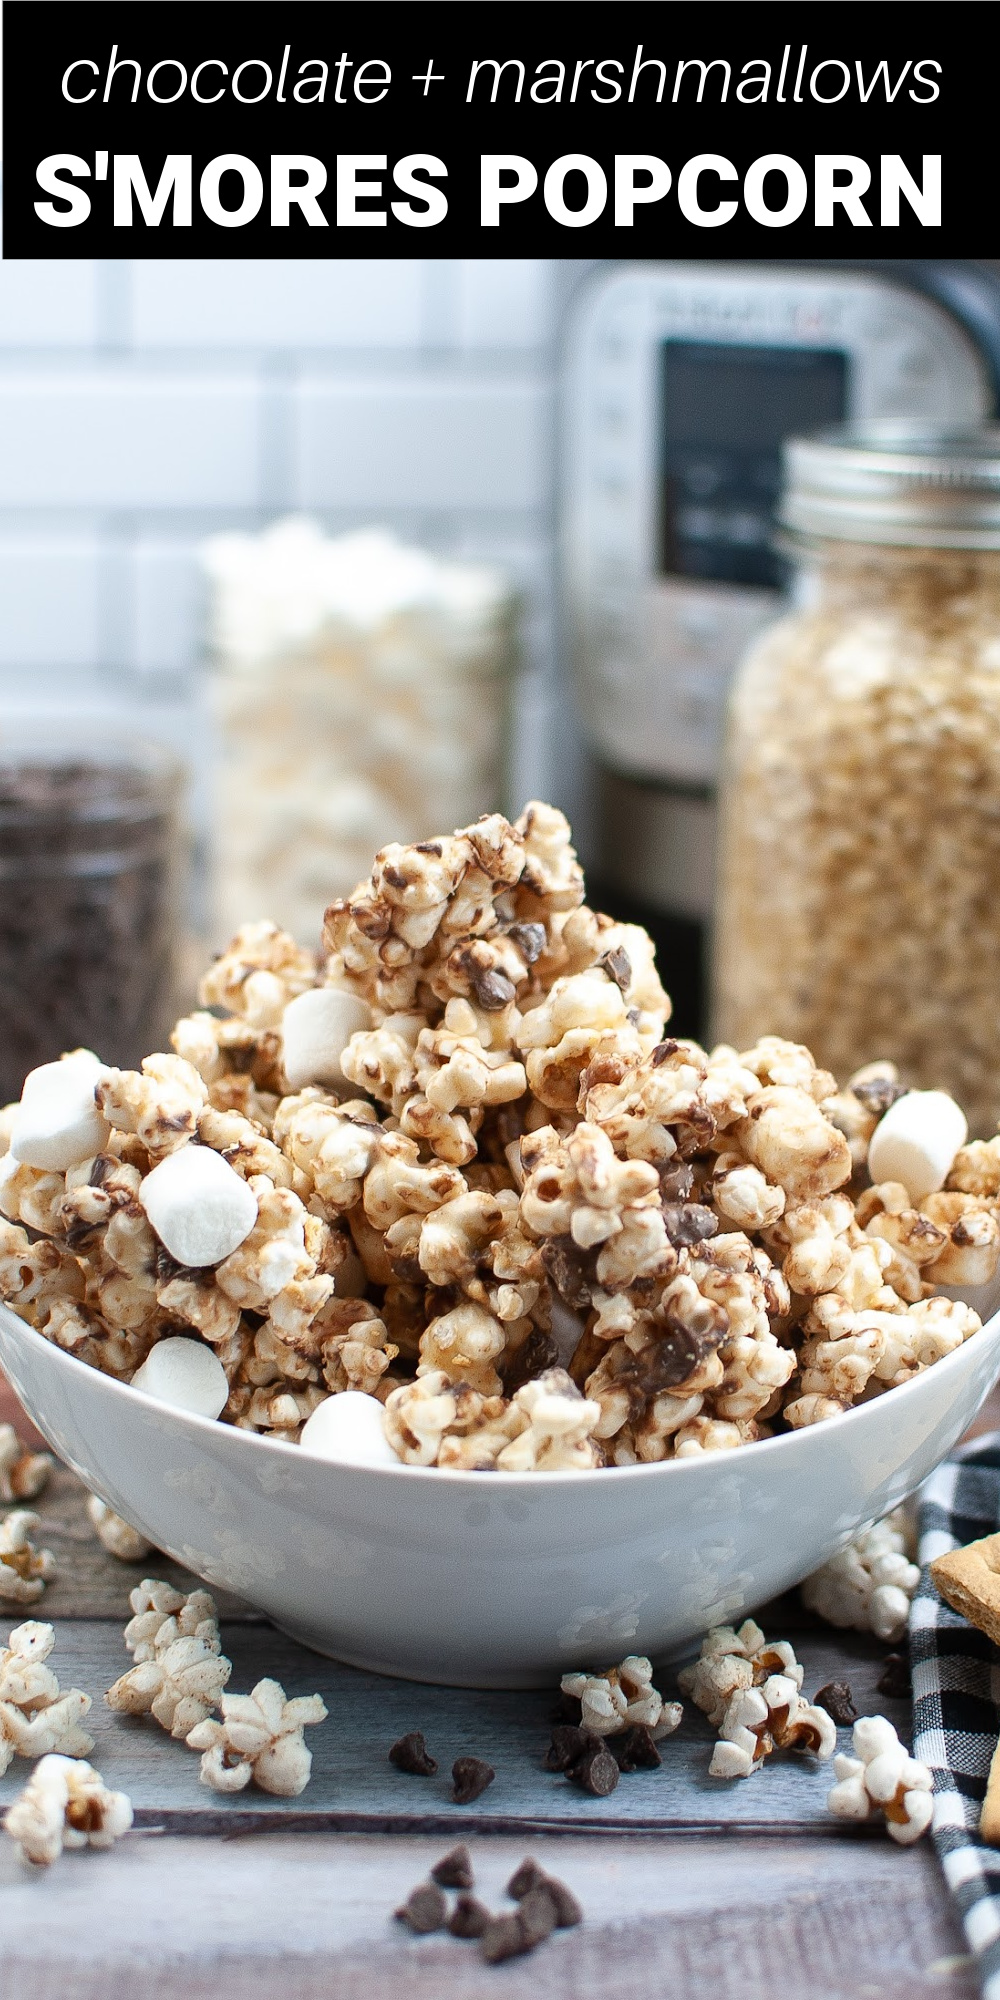 S'mores Popcorn has the best flavors found at all great campfires packed into delicious bite-sized pieces. Made with graham crackers, marshmallows, milk chocolate chips, and white chocolate, this recipe combines sweet and salty and comes together in just 10 minutes.